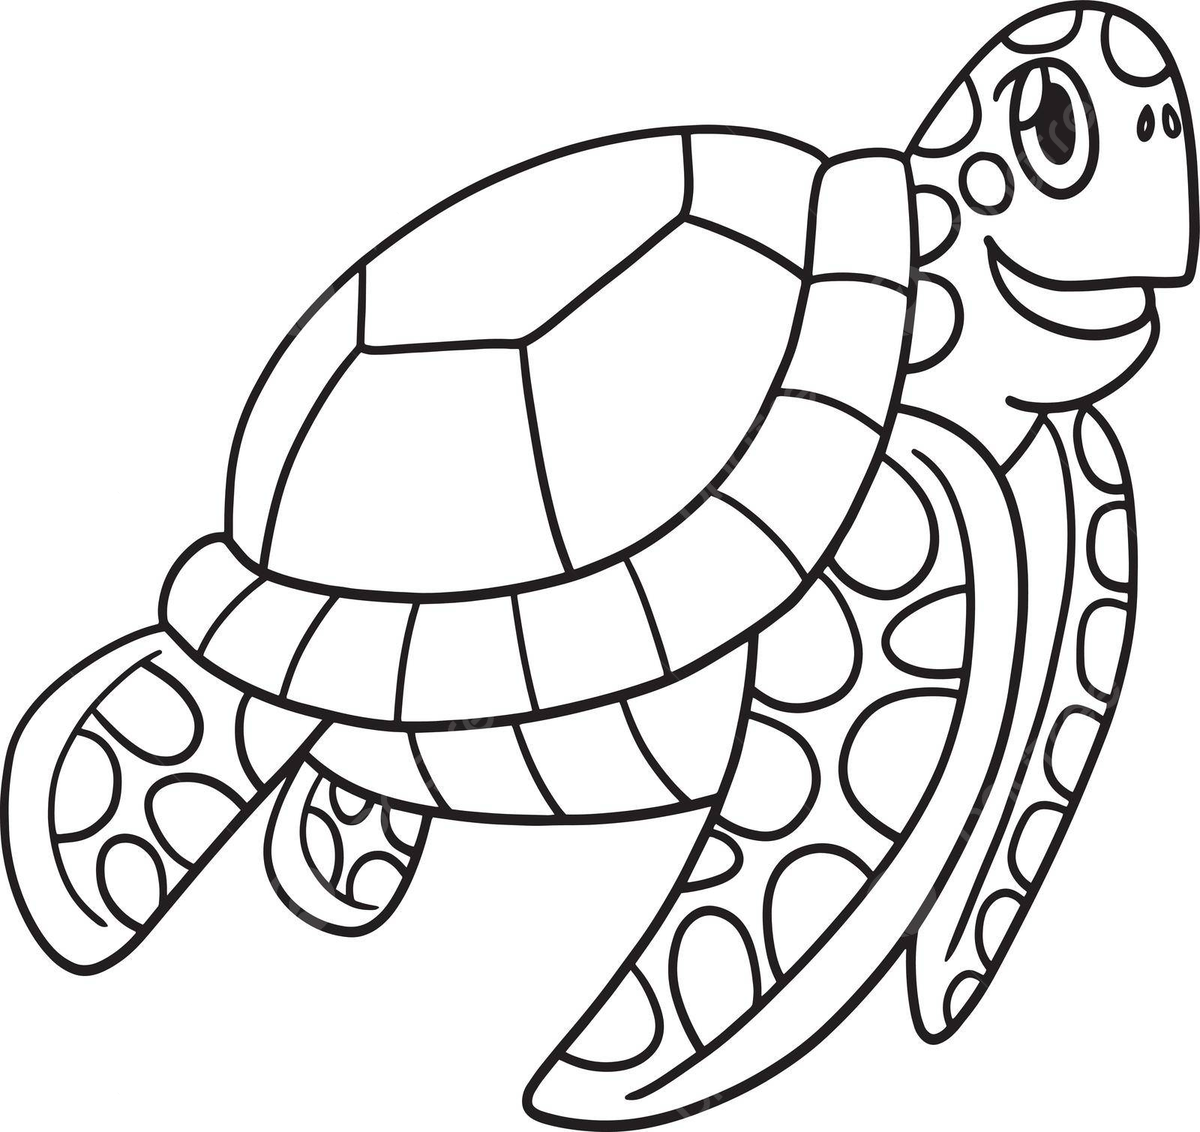 Colouring pages clipart images free download png transparent background